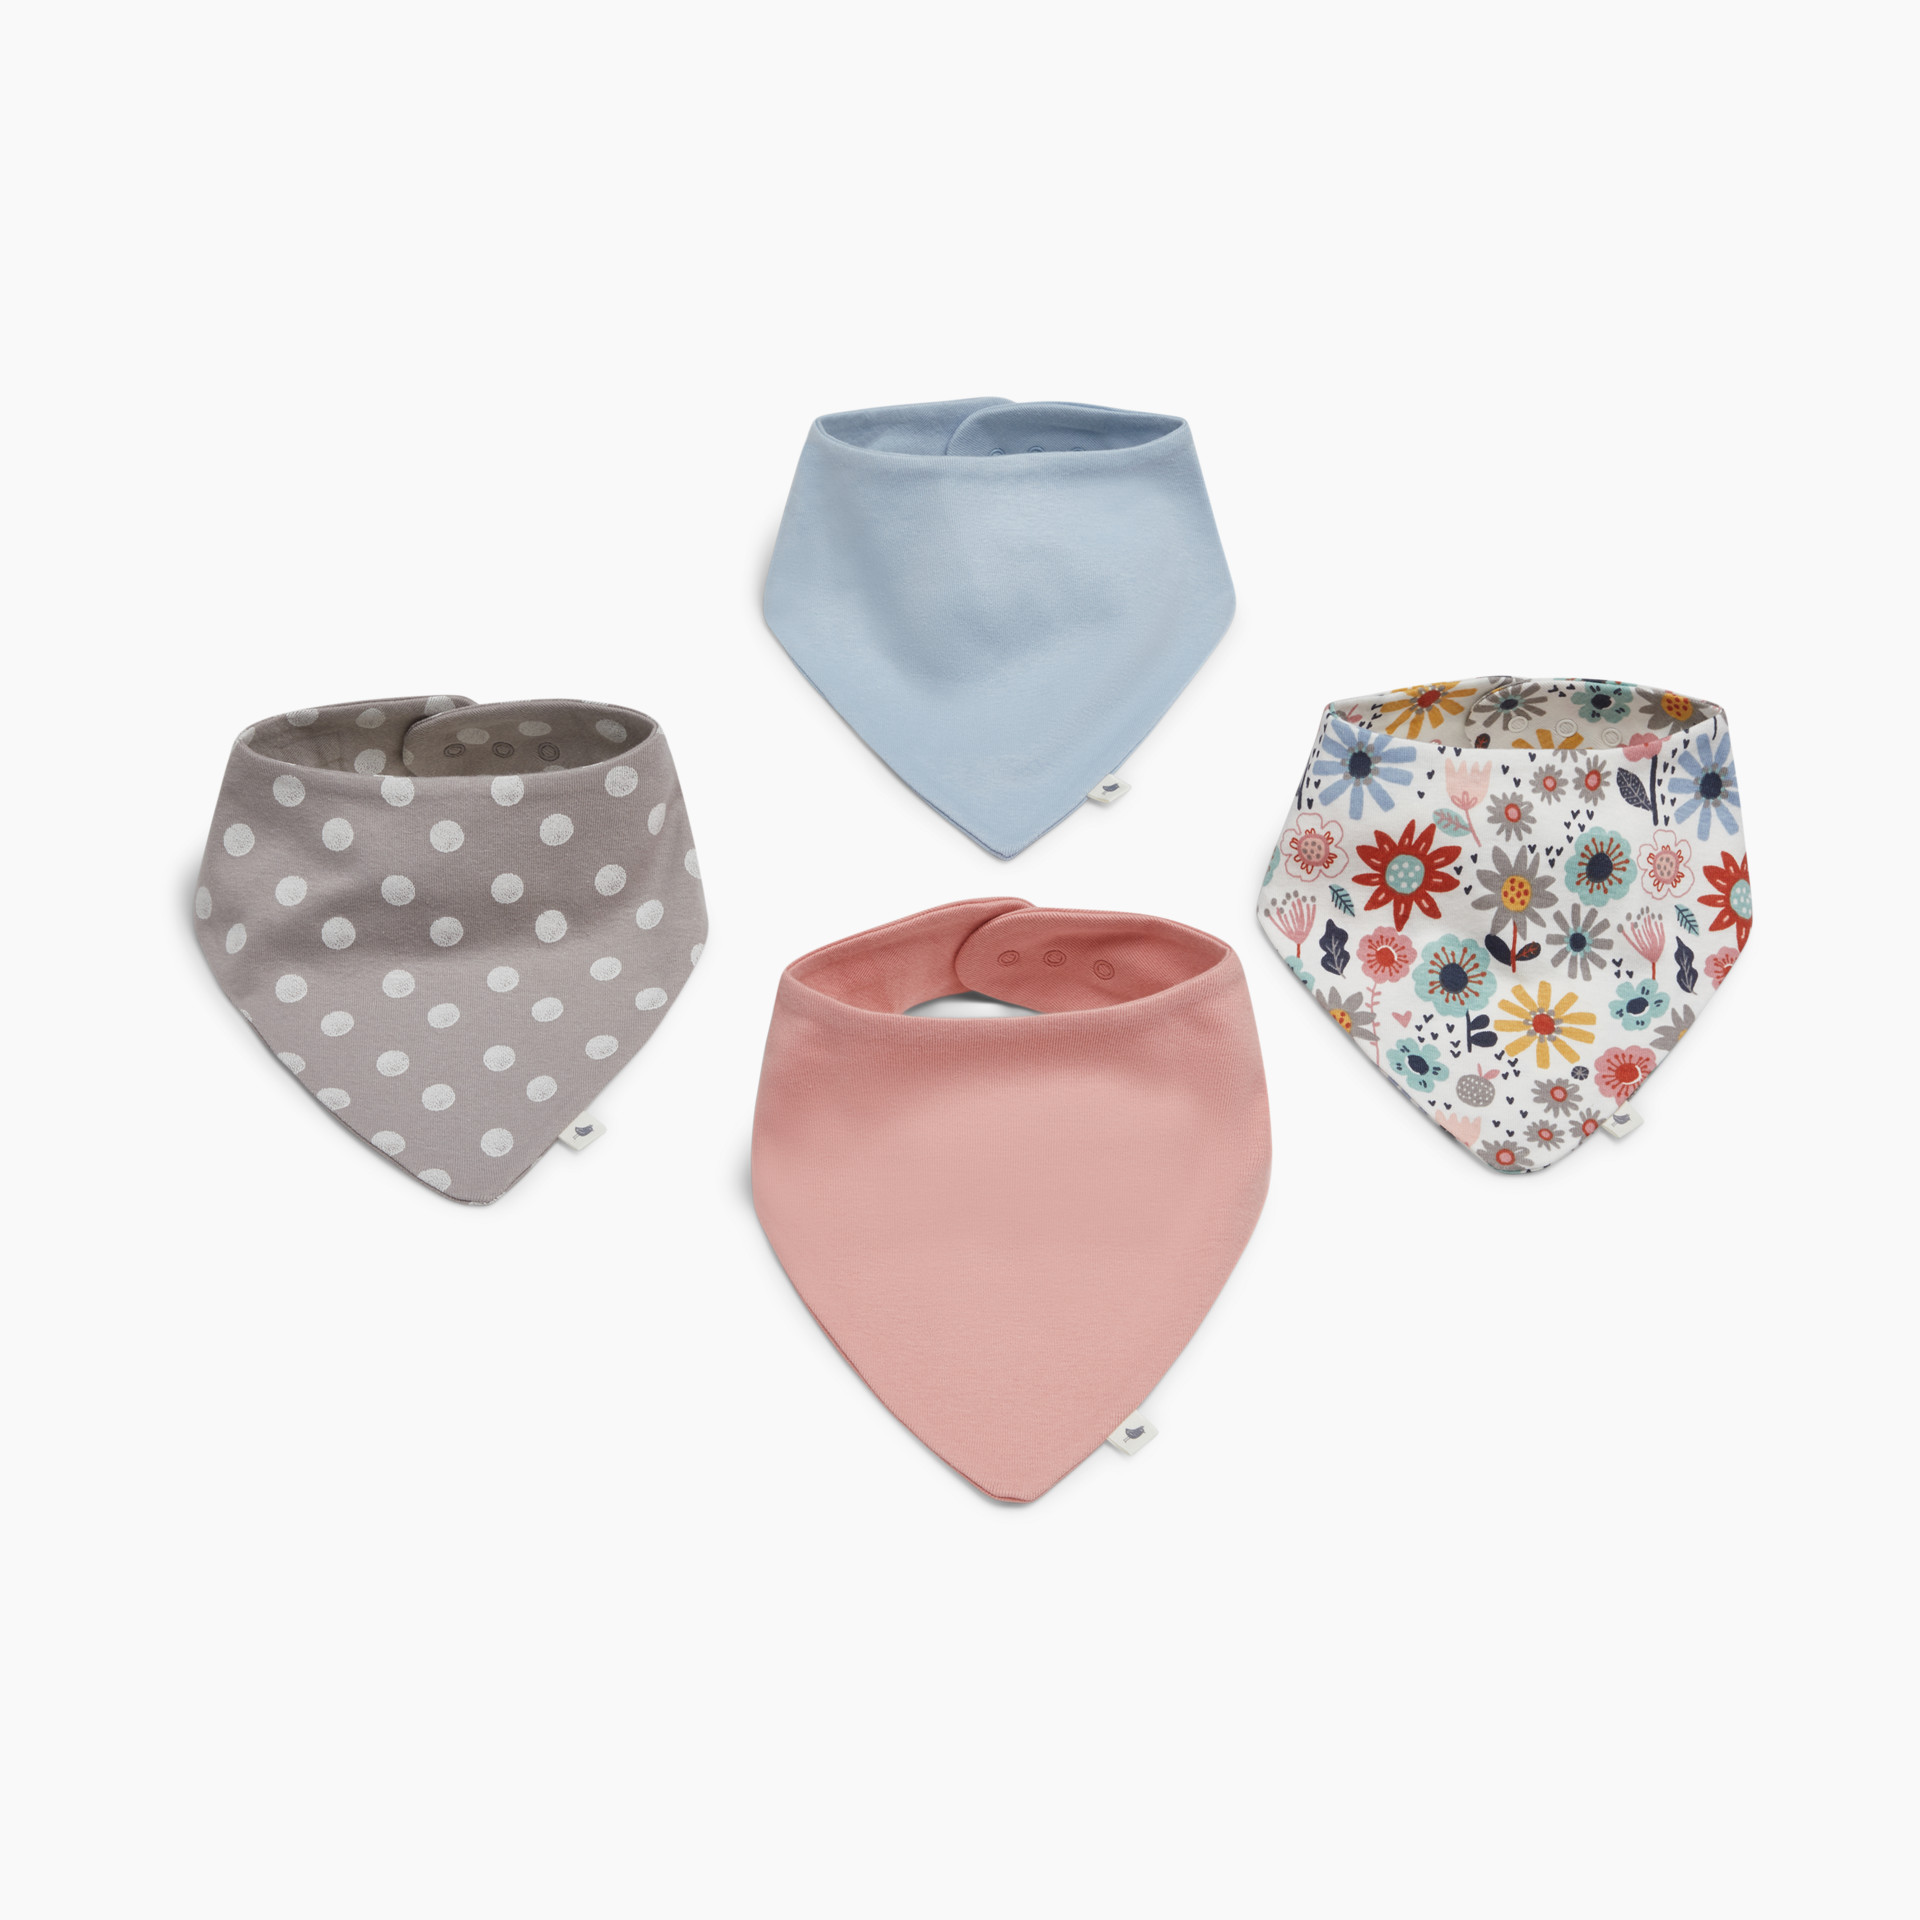 days of the week briefs - 7 pack - Mothercare